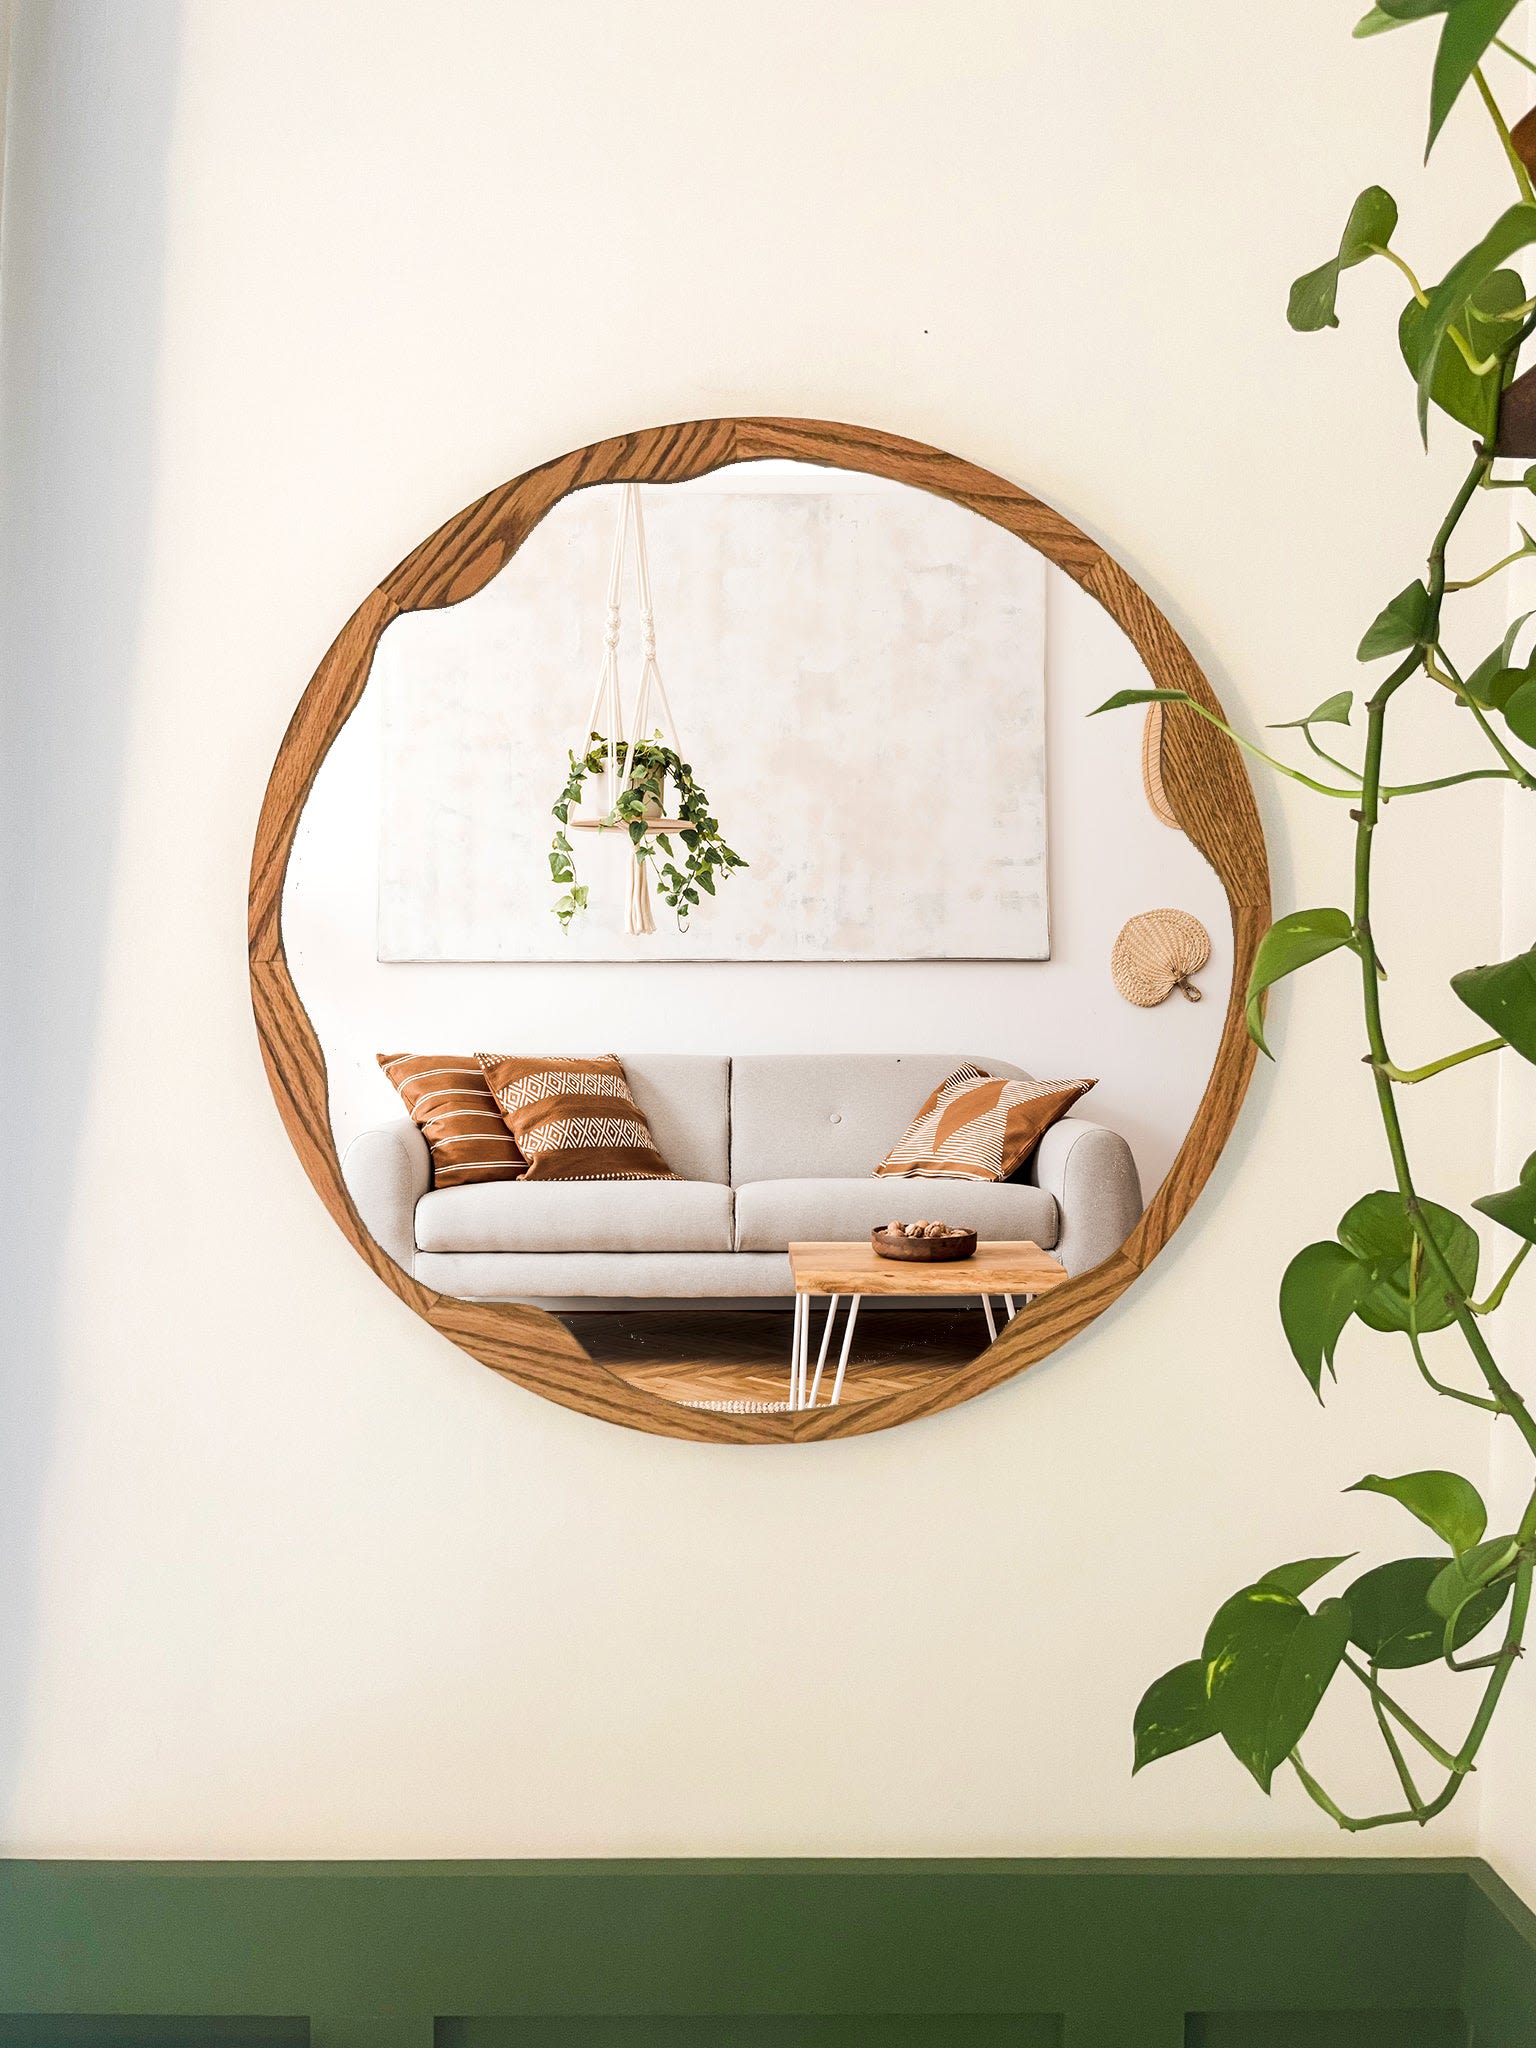 Round Mirrors Are Our Latest Decor Obsession: Here Are 8 to Shop Now